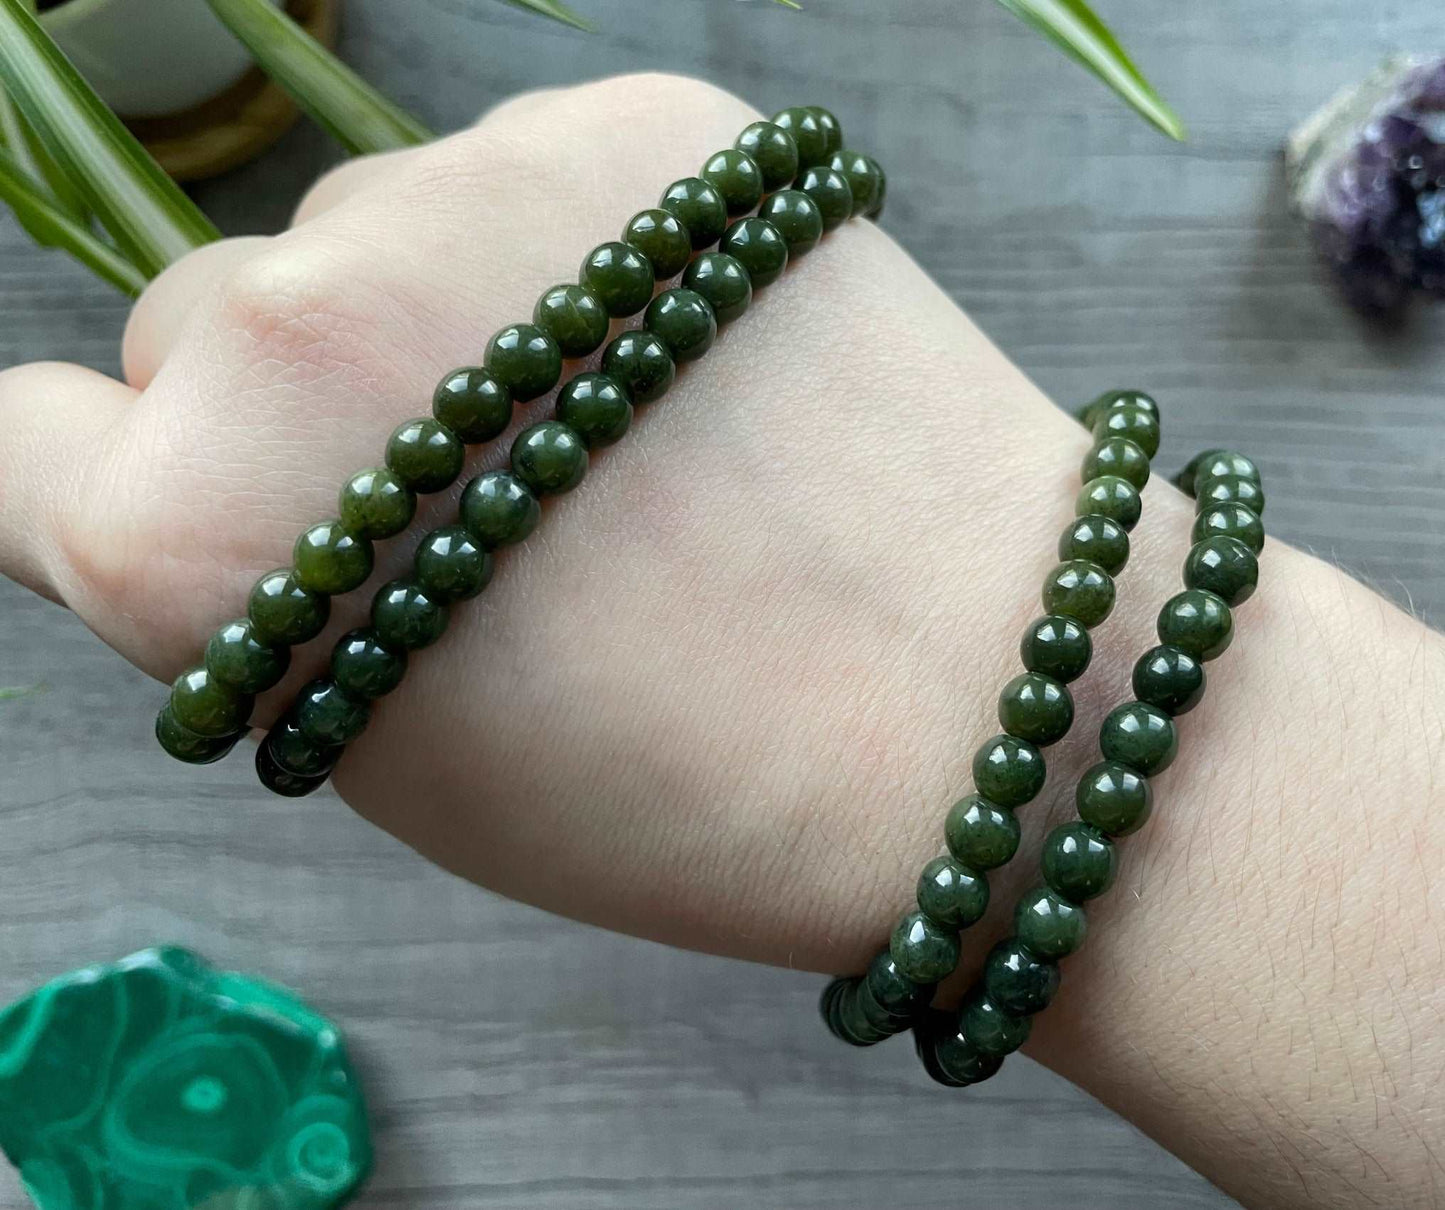 Pictured is a Canadian nephrite jade bead bracelet.